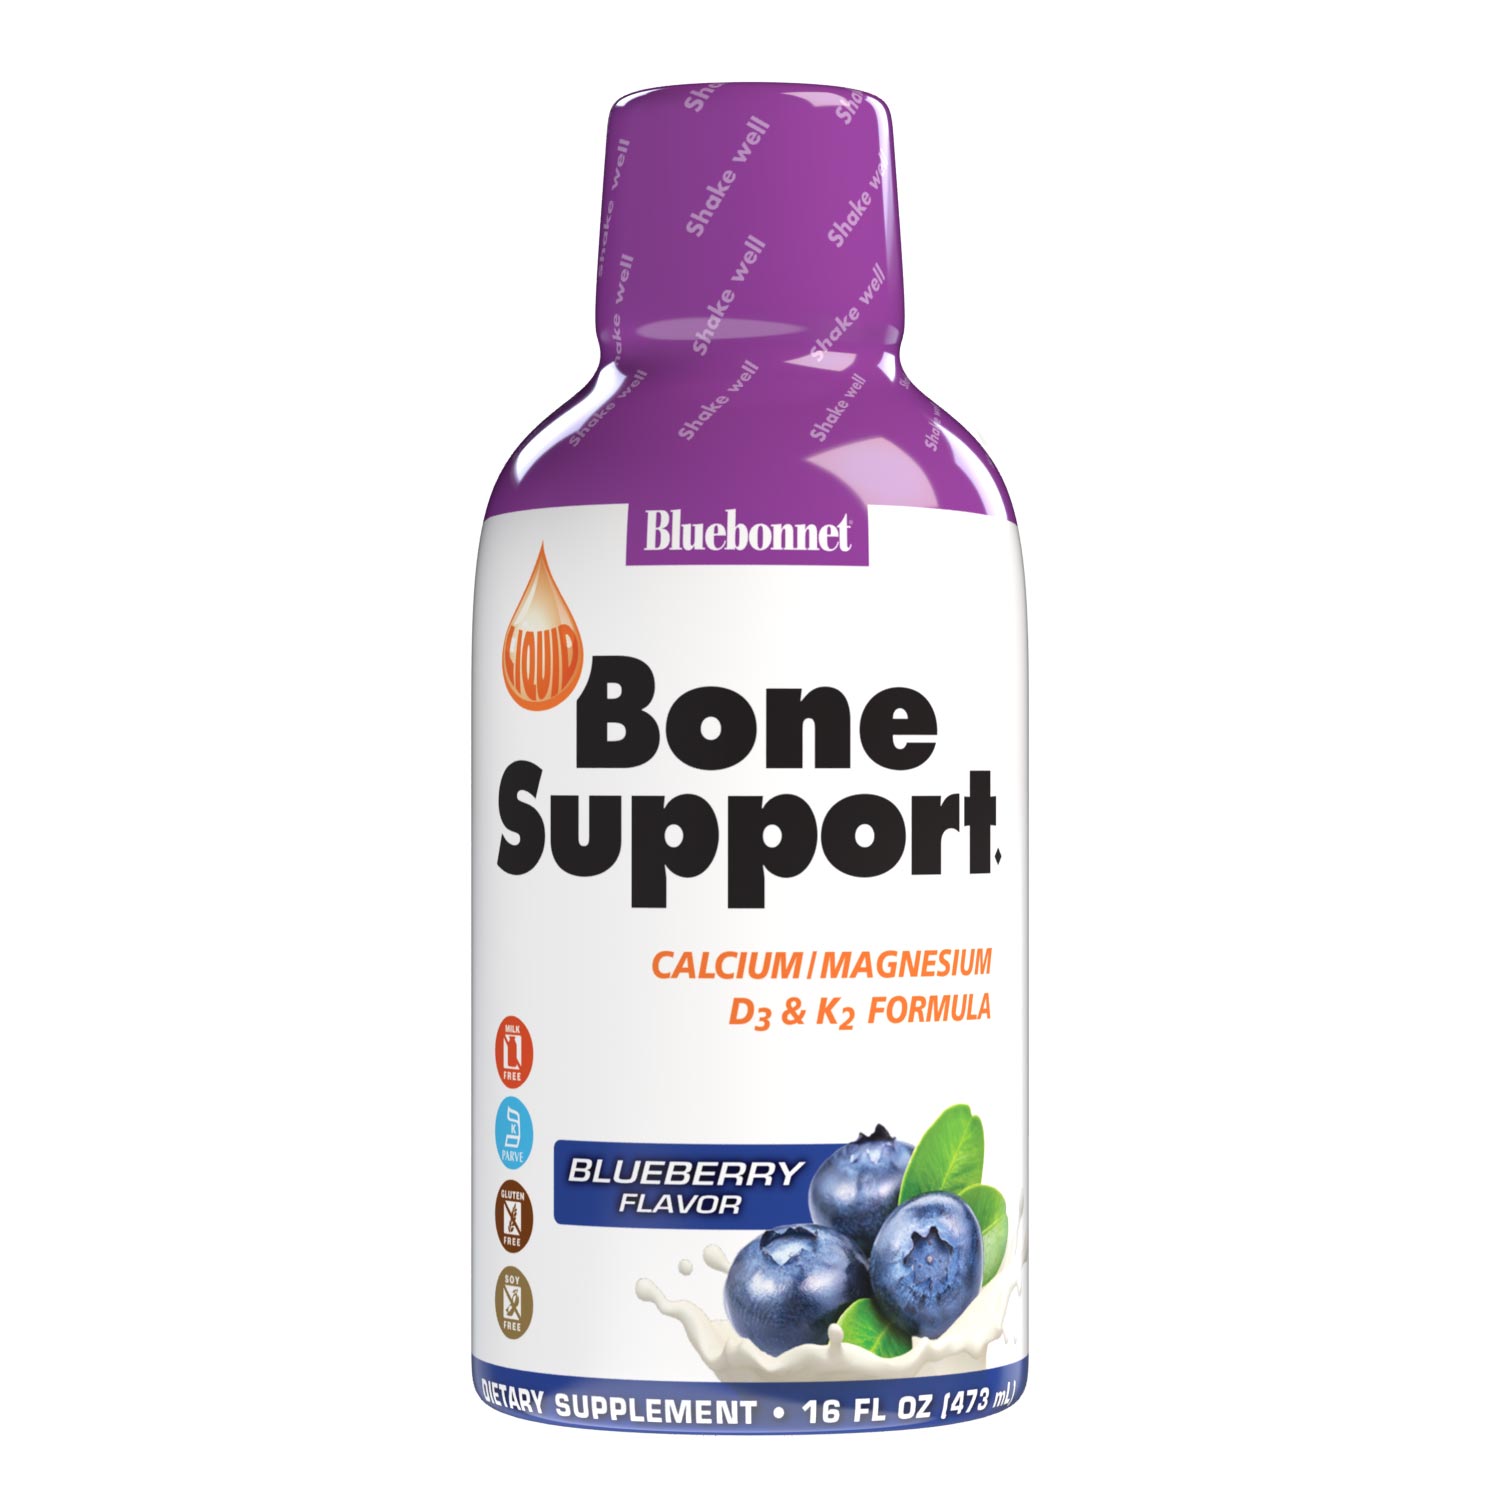 Bluebonnet's Liquid Bone Support with Calcium Magnesium and Vitamins D3 & K2 is formulated with the more bioavailable chelated forms of calcium (calcium citrate) and magnesium (magnesium citrate and aspartate). Calcium and magnesium are not just necessary for healthy bones and teeth; they are also essential for healthy blood circulation, nerve impulse transmission, muscle contractions, and cell metabolism. #size_16 fl oz